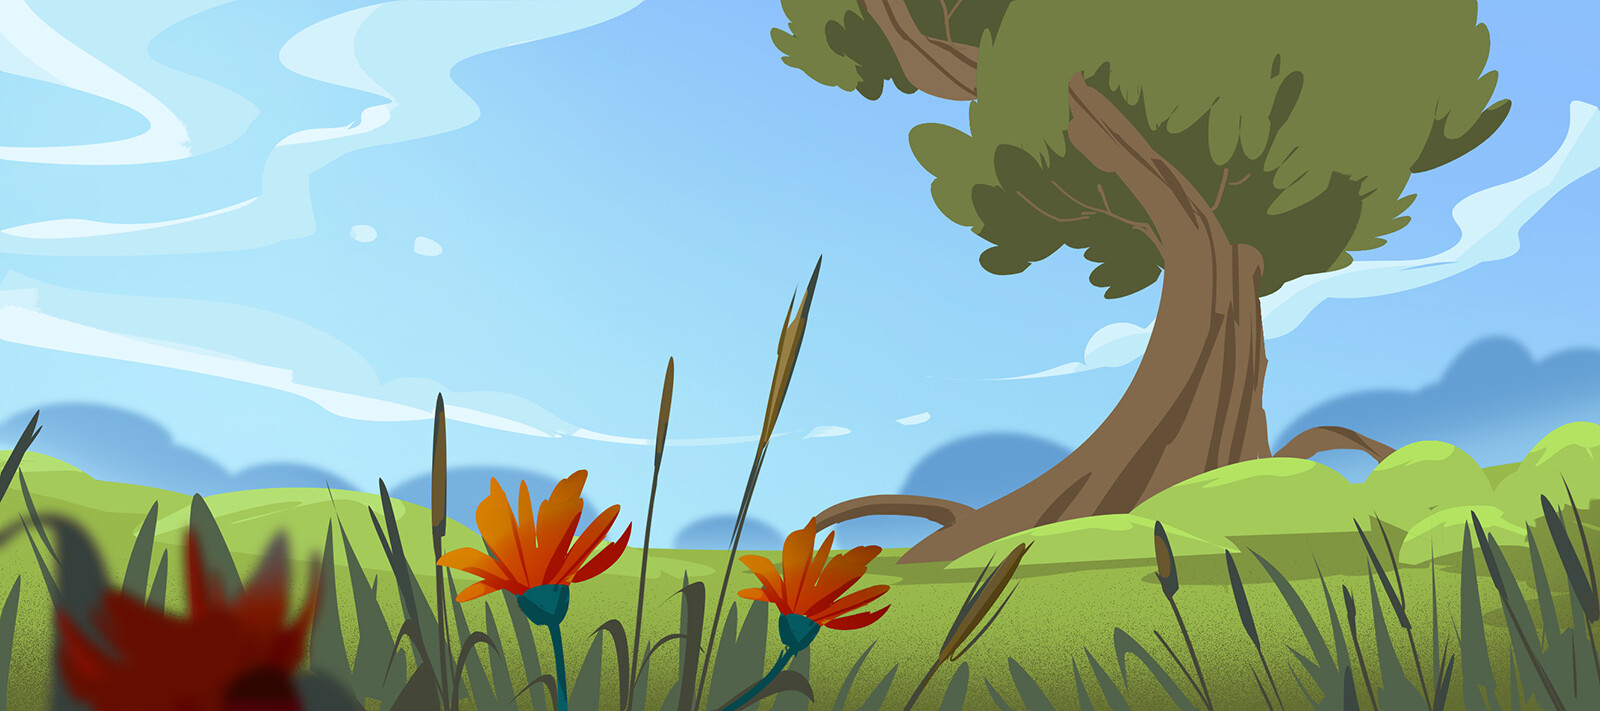 John Paul - 2D game or animation background